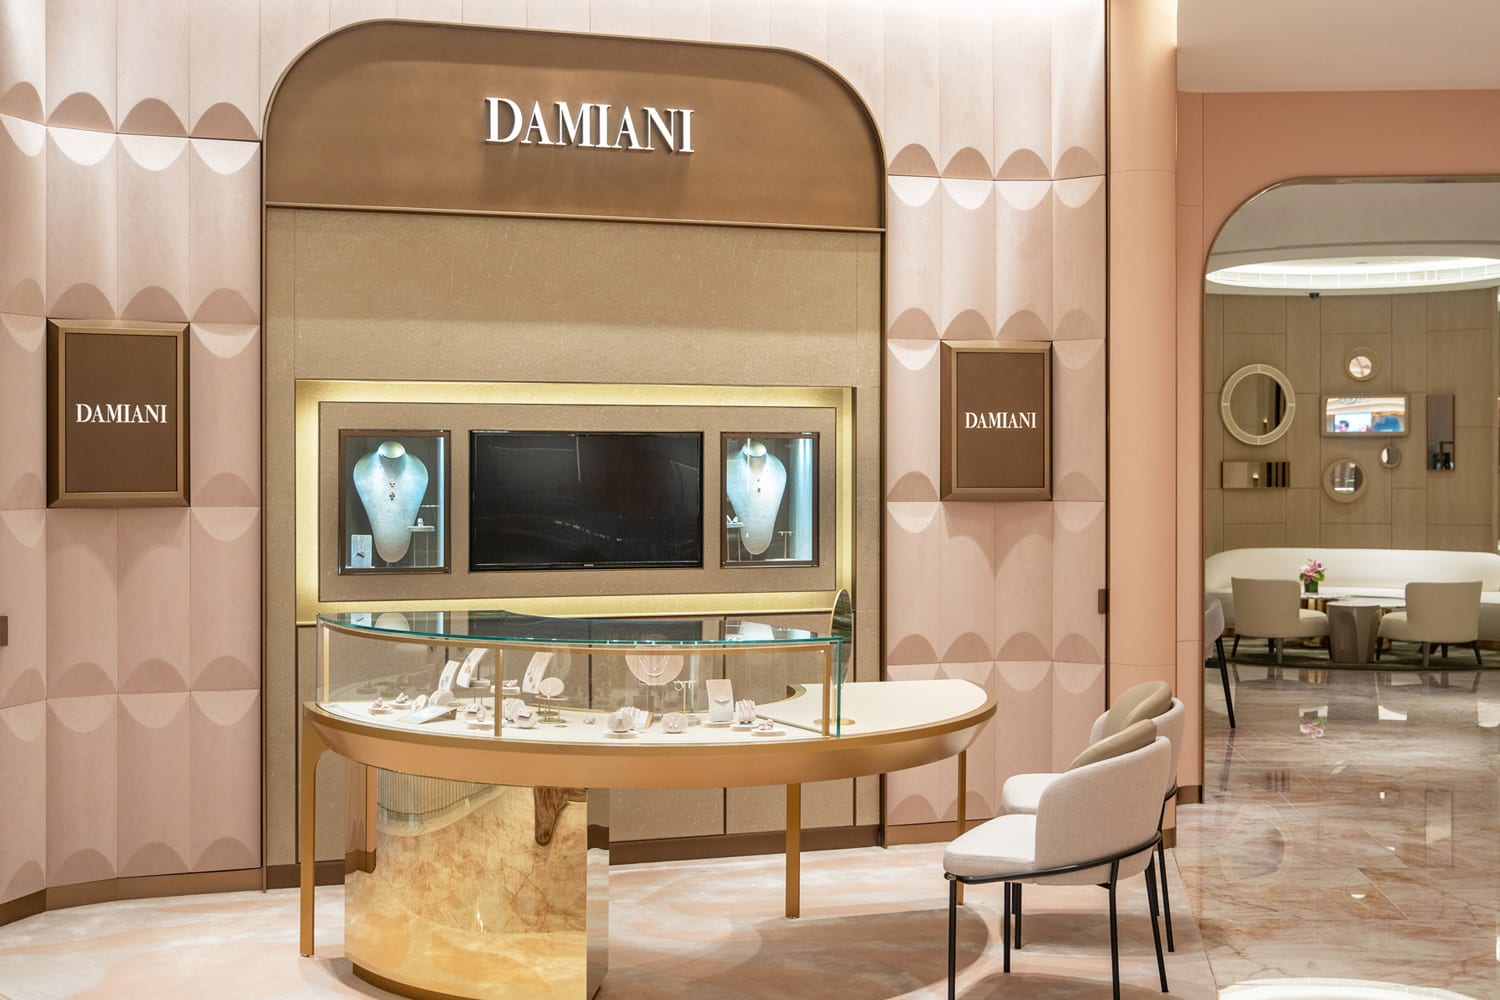 DFS unveils House of Jewels at Shoppes at Four Seasons, Macau